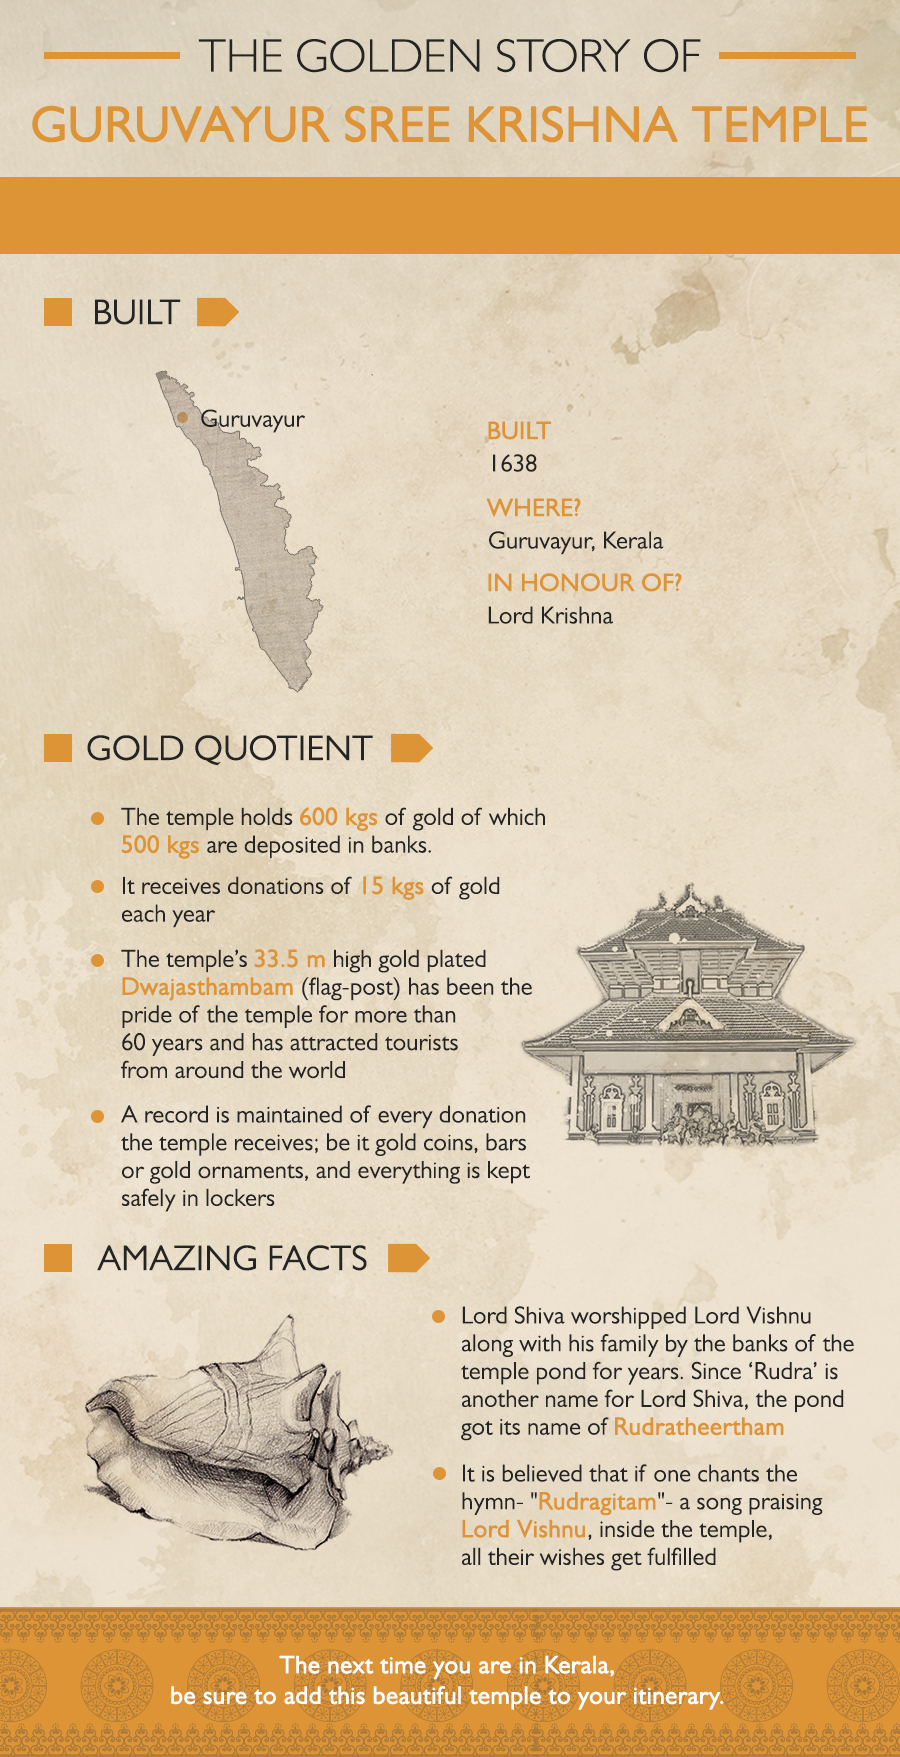 Holding about 600 Kgs of gold, Guruvayur Sree Krishna temple in Guruvayur, Kerala is among the richest temples in India. Check out more amazing facts about this mesmerising temple.